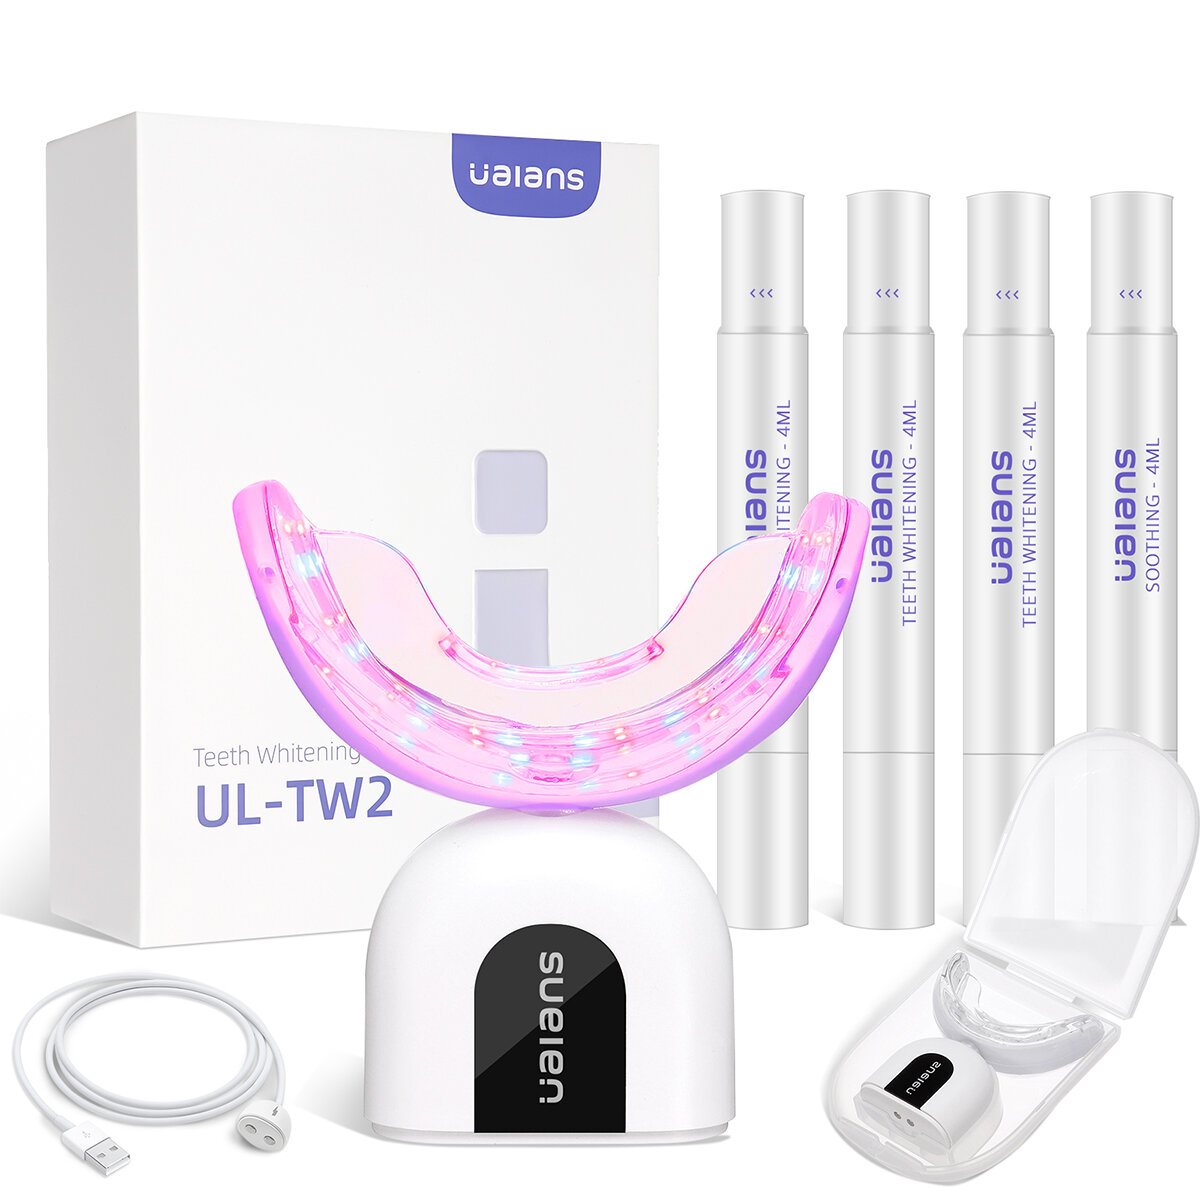 UALANS TW2 Teeth Whitening Kit 6X LED Light Tooth Whitener With 35% Carbamide Peroxide With Magnetic Integration Charging Super 3+1 Gel Capsule Combination IPX6 Waterproof 10 Minute Timer